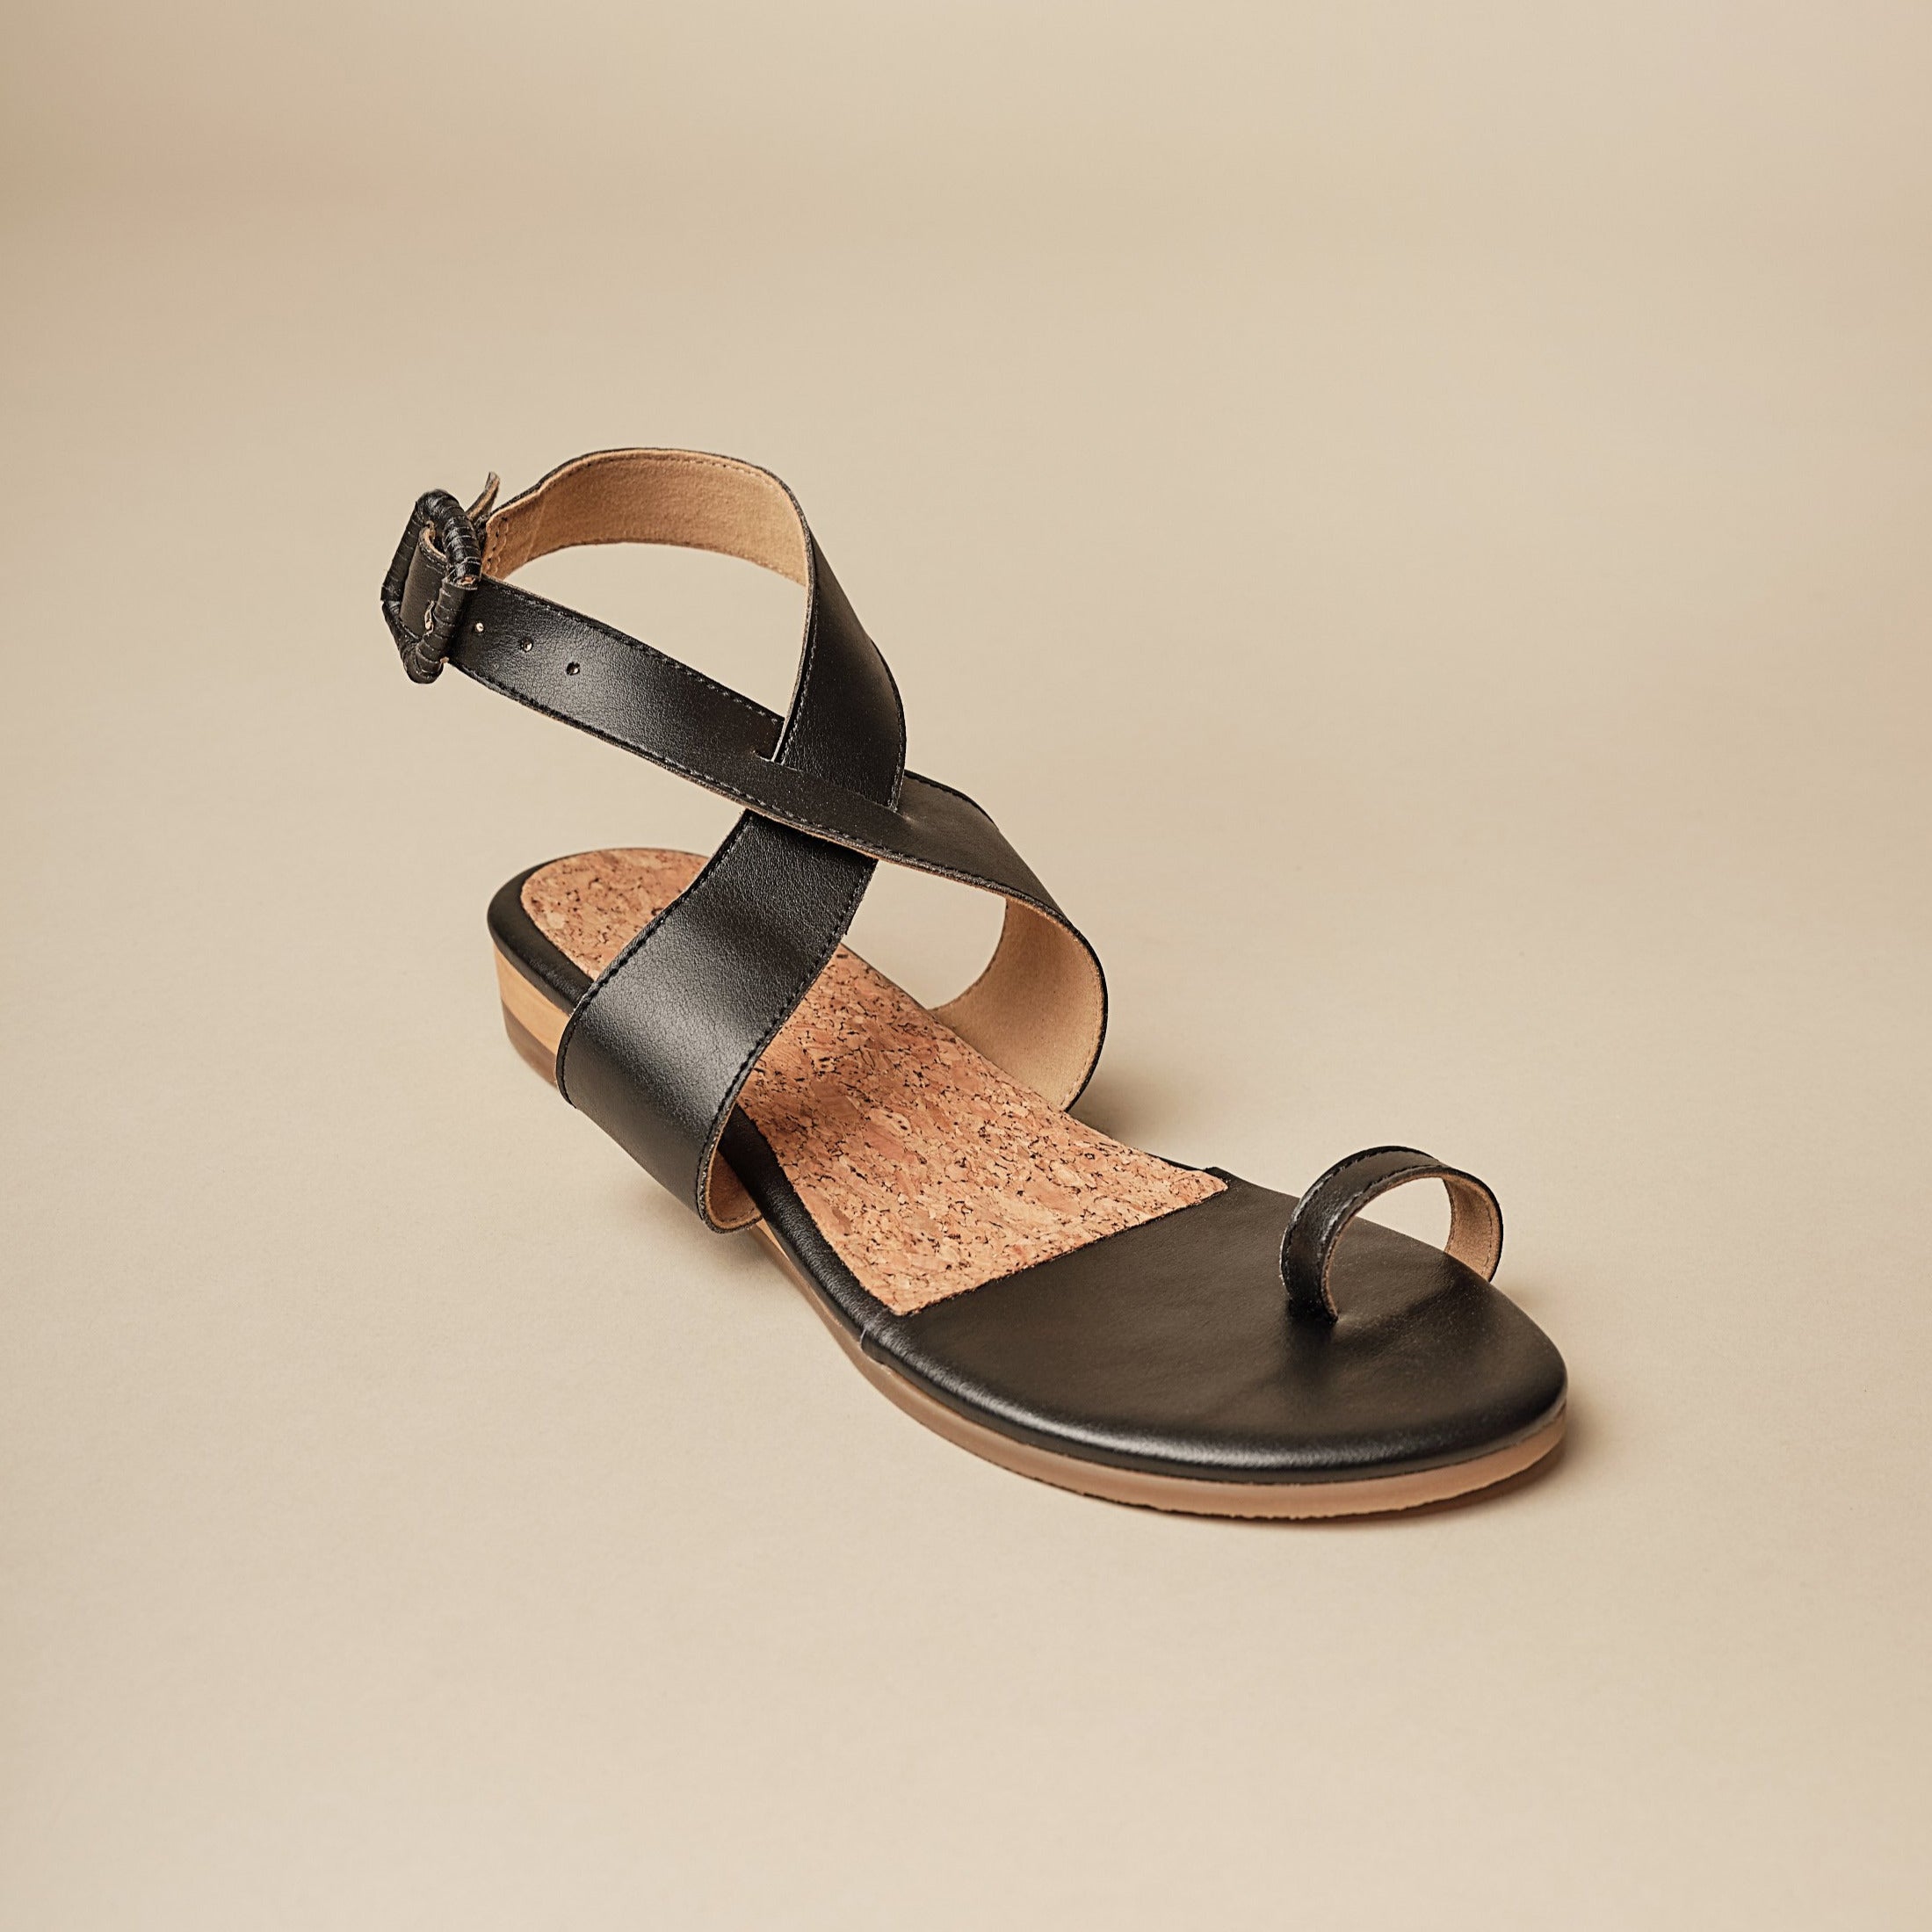 Cydwoq Thong Sandal. Women's sandal in black leather. Made in